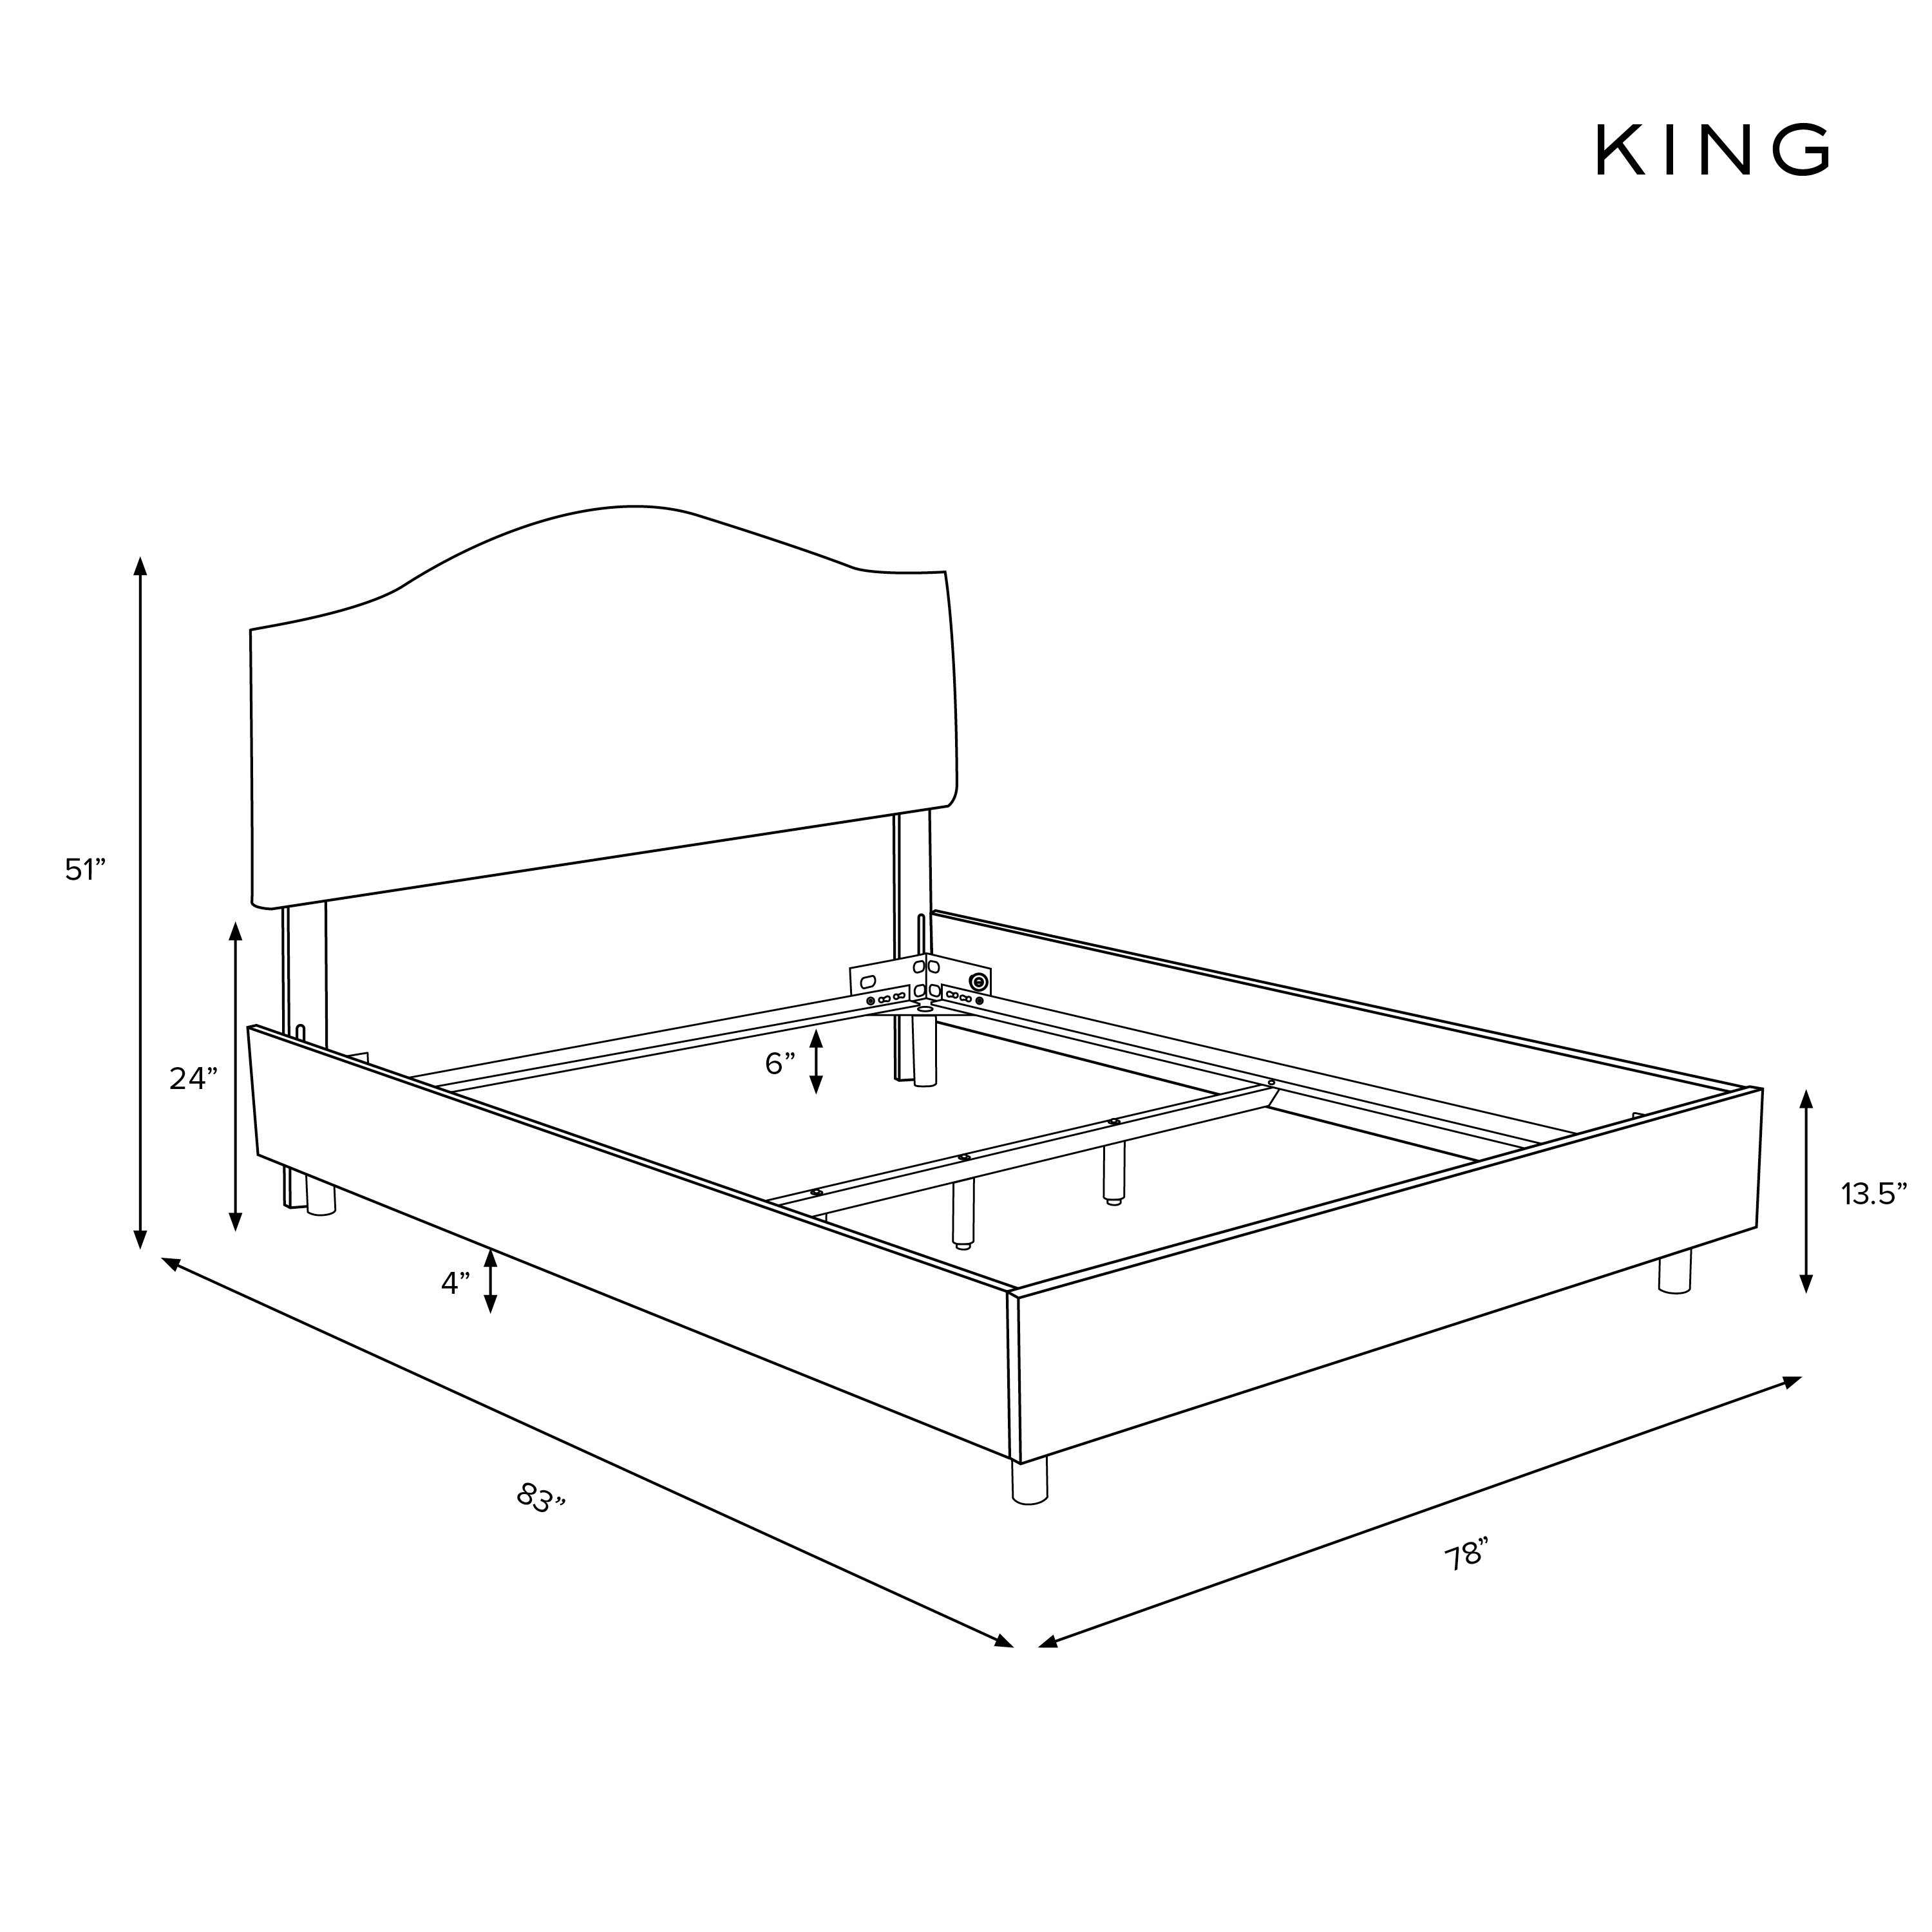 King Kenmore Bed in Zuma White - Image 5